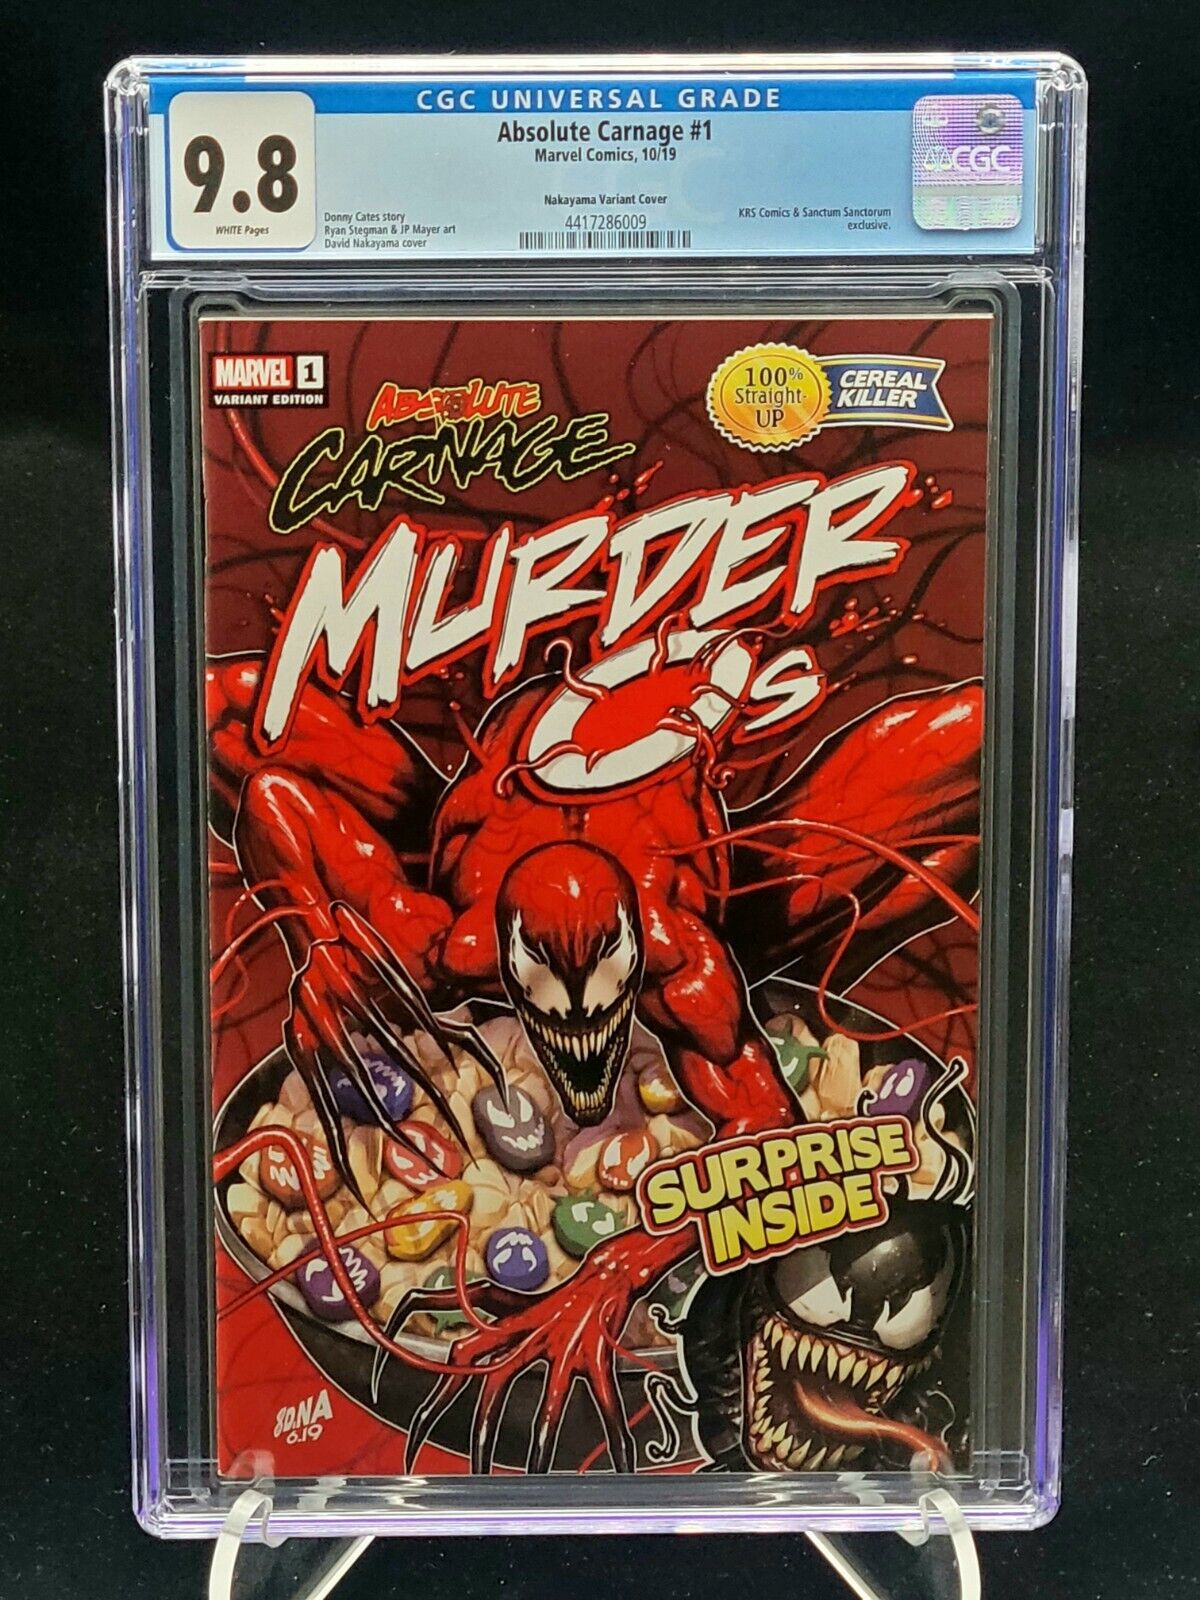 Absolute Carnage #1 [Variant] - CGC 9.8